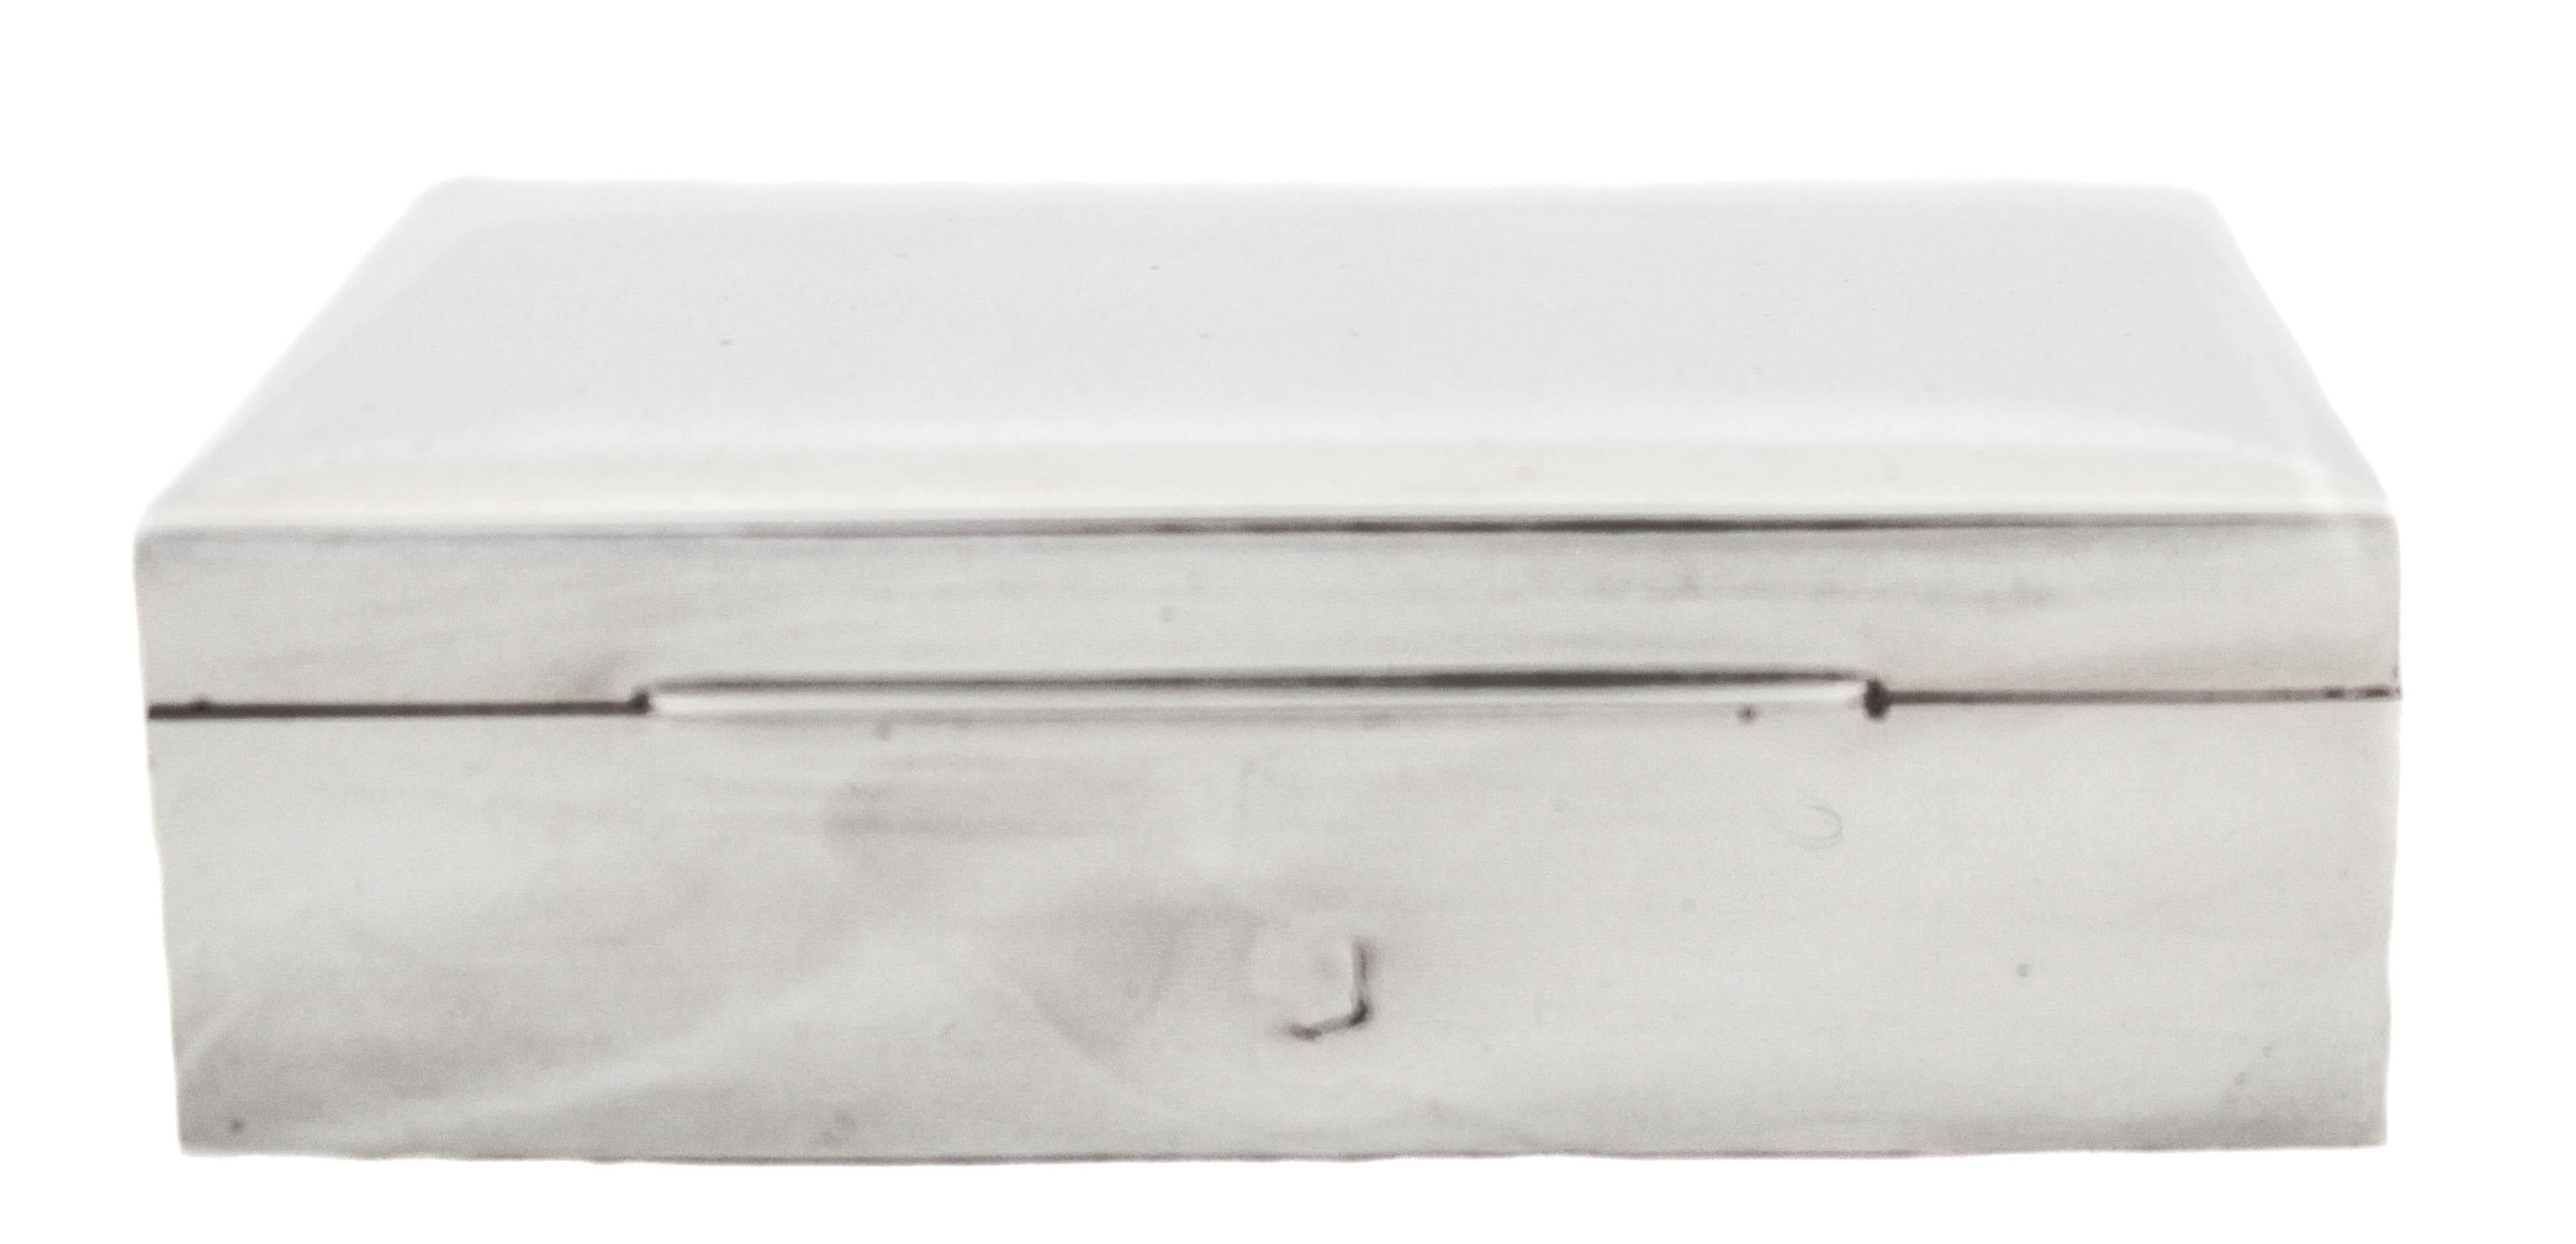 Being offered is a men's sterling silver jewelry box. It is from the 1950s and has that Classic Midcentury look; sleek and Minimalist. The inside is wood that we have had restrained so it’s pristine. The outside shows some sign of age, which is